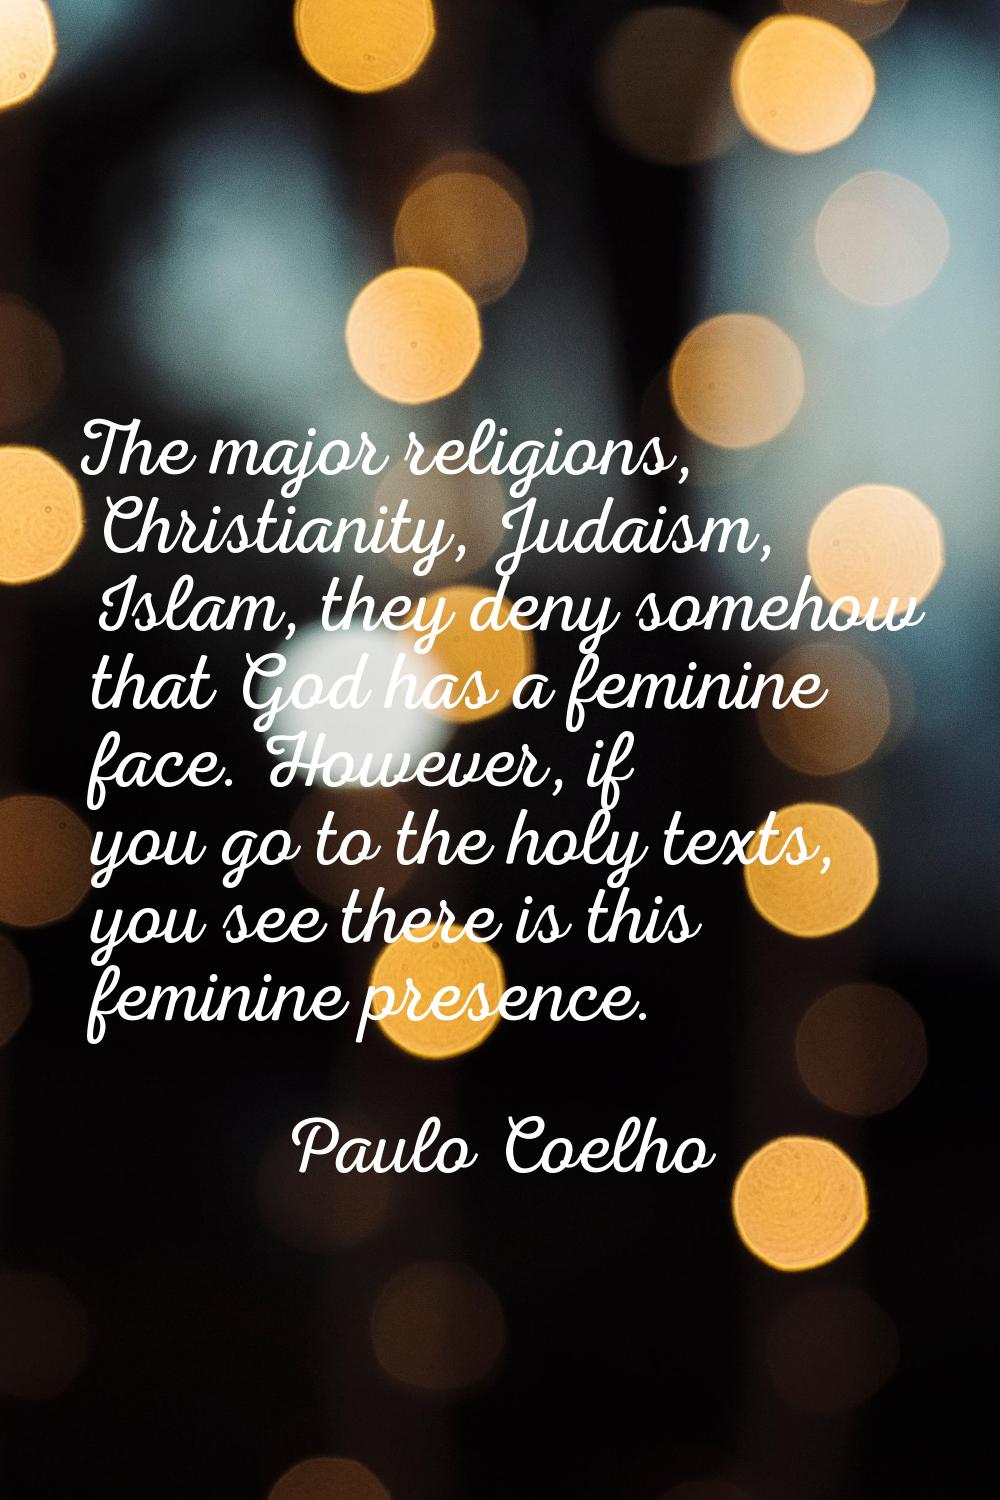 The major religions, Christianity, Judaism, Islam, they deny somehow that God has a feminine face. 